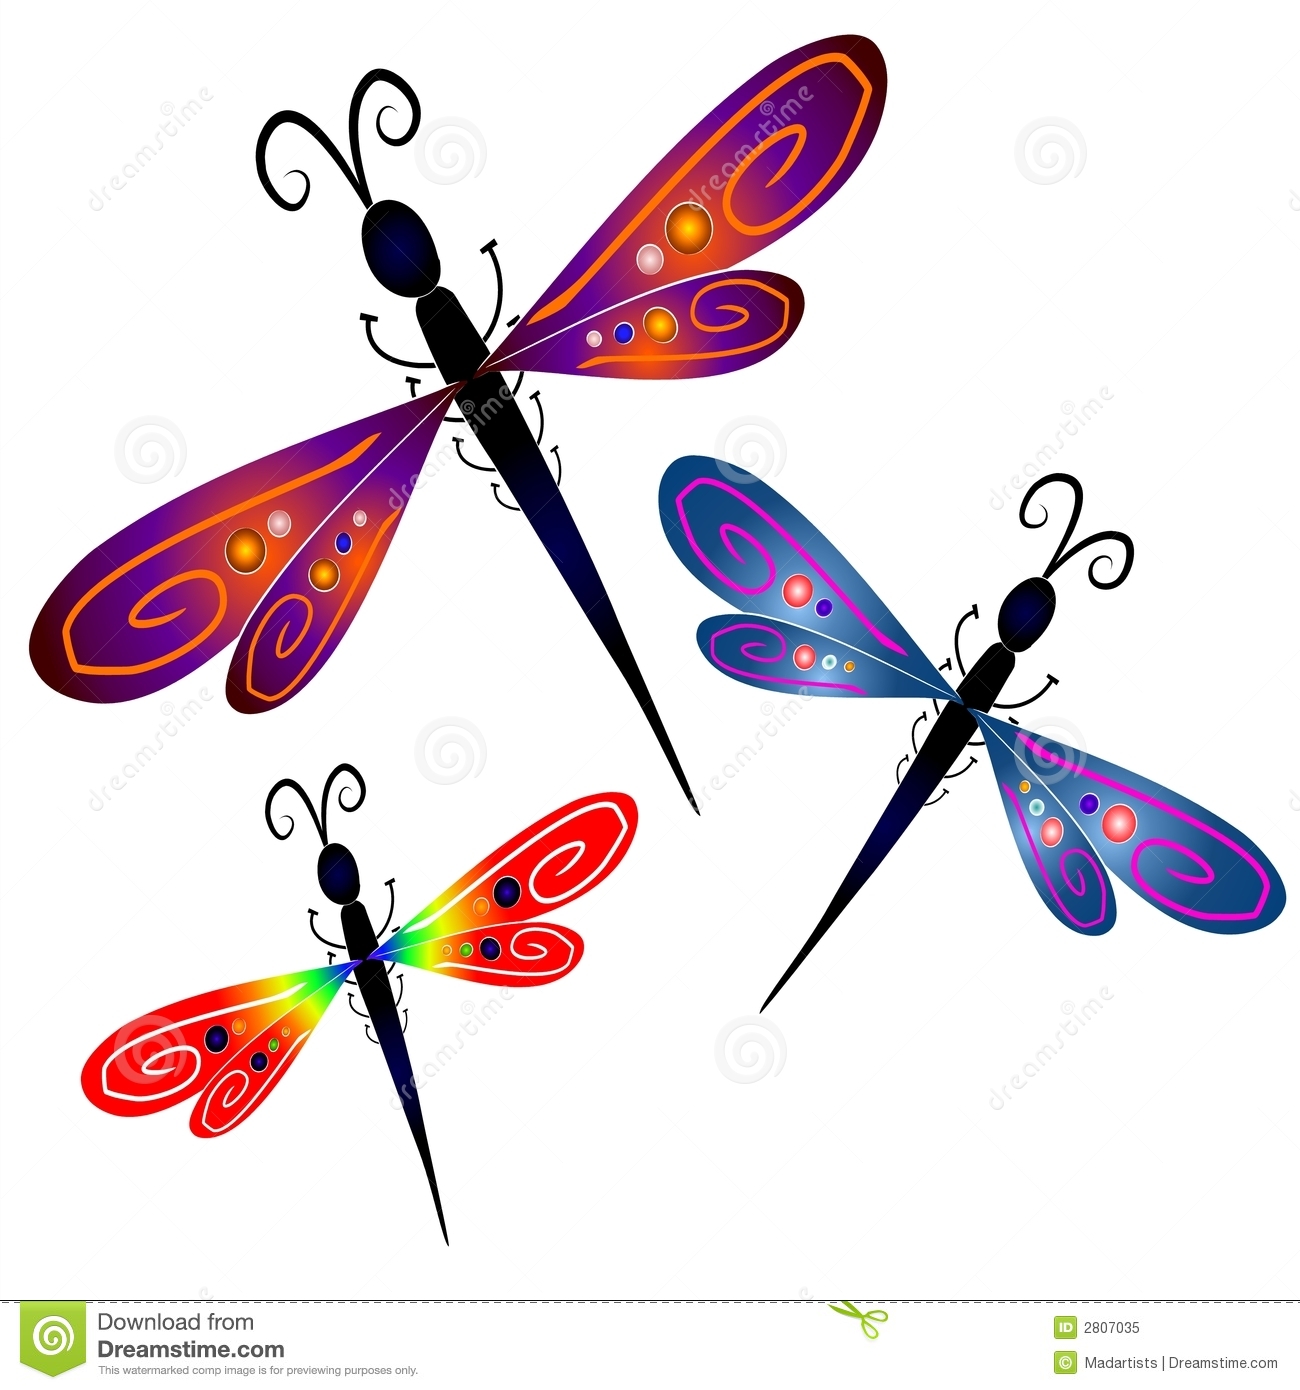 Dragonfly clipart 3